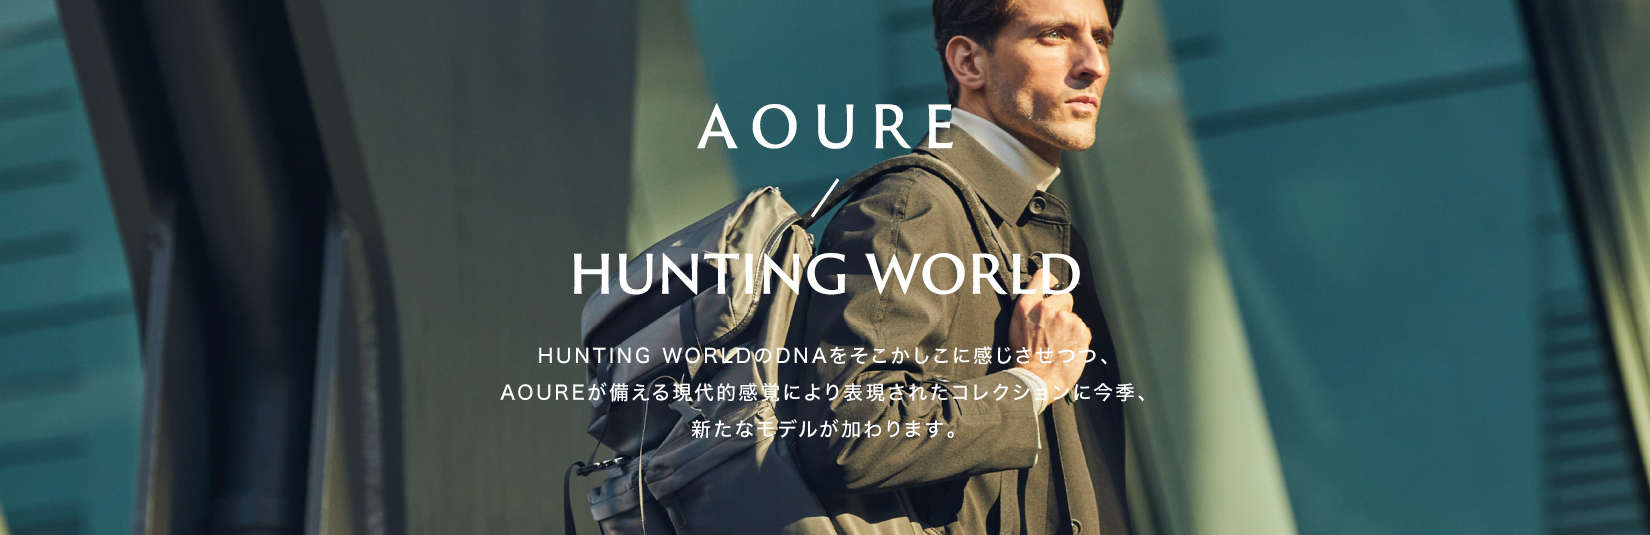 HUNTING WORLD × AOURE